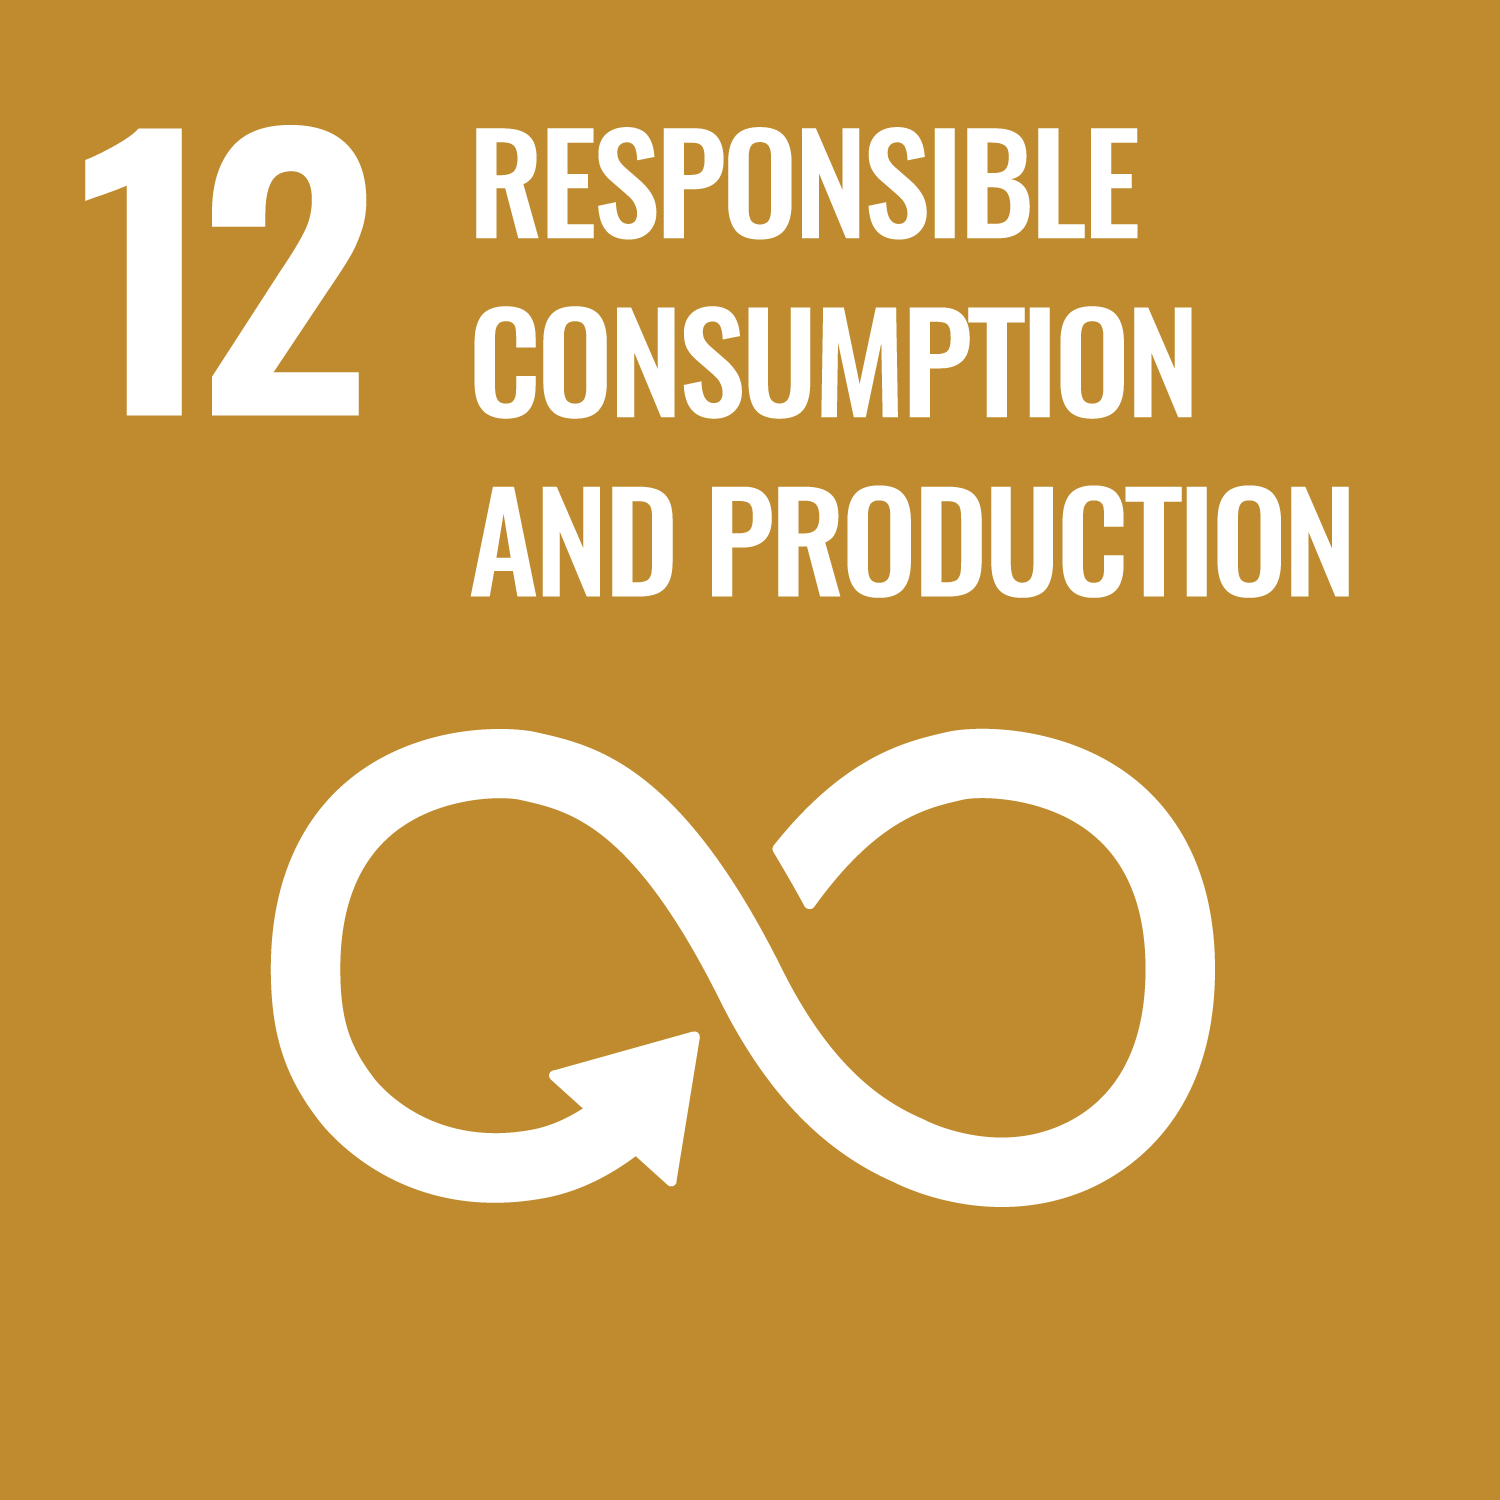 SDGs12.RESPONSIBLE CONSUMPTION AND PRODUCTION